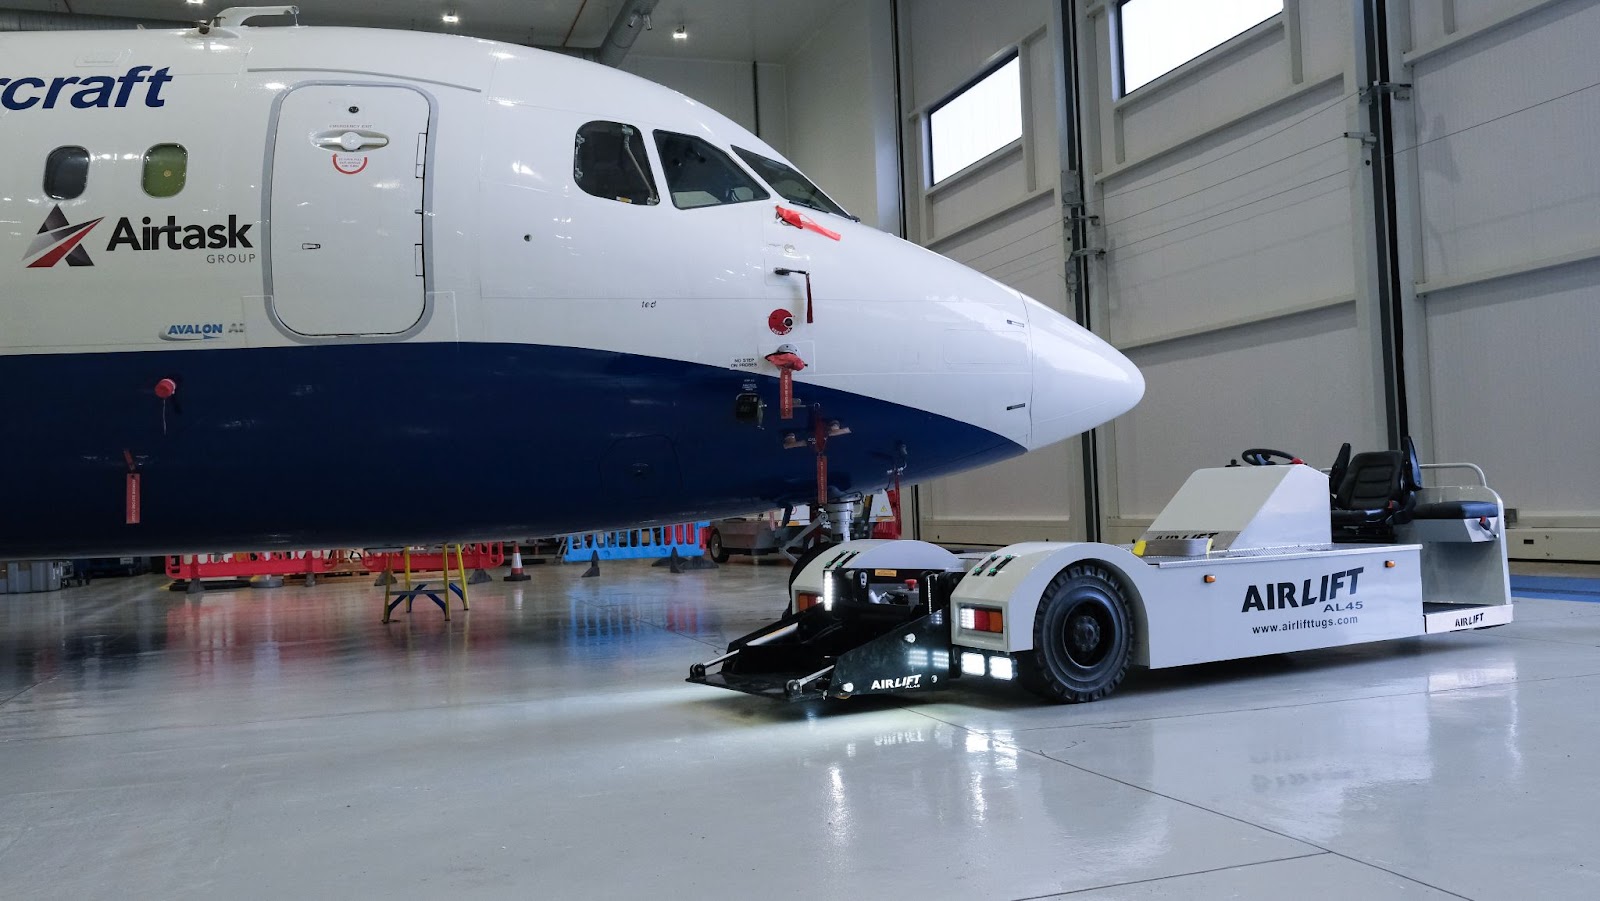 A white electric towing vehicle parked in front of a large blue and white research aircraft inside a hangar. The white lights on the tug are illuminating the hangar floor around it.